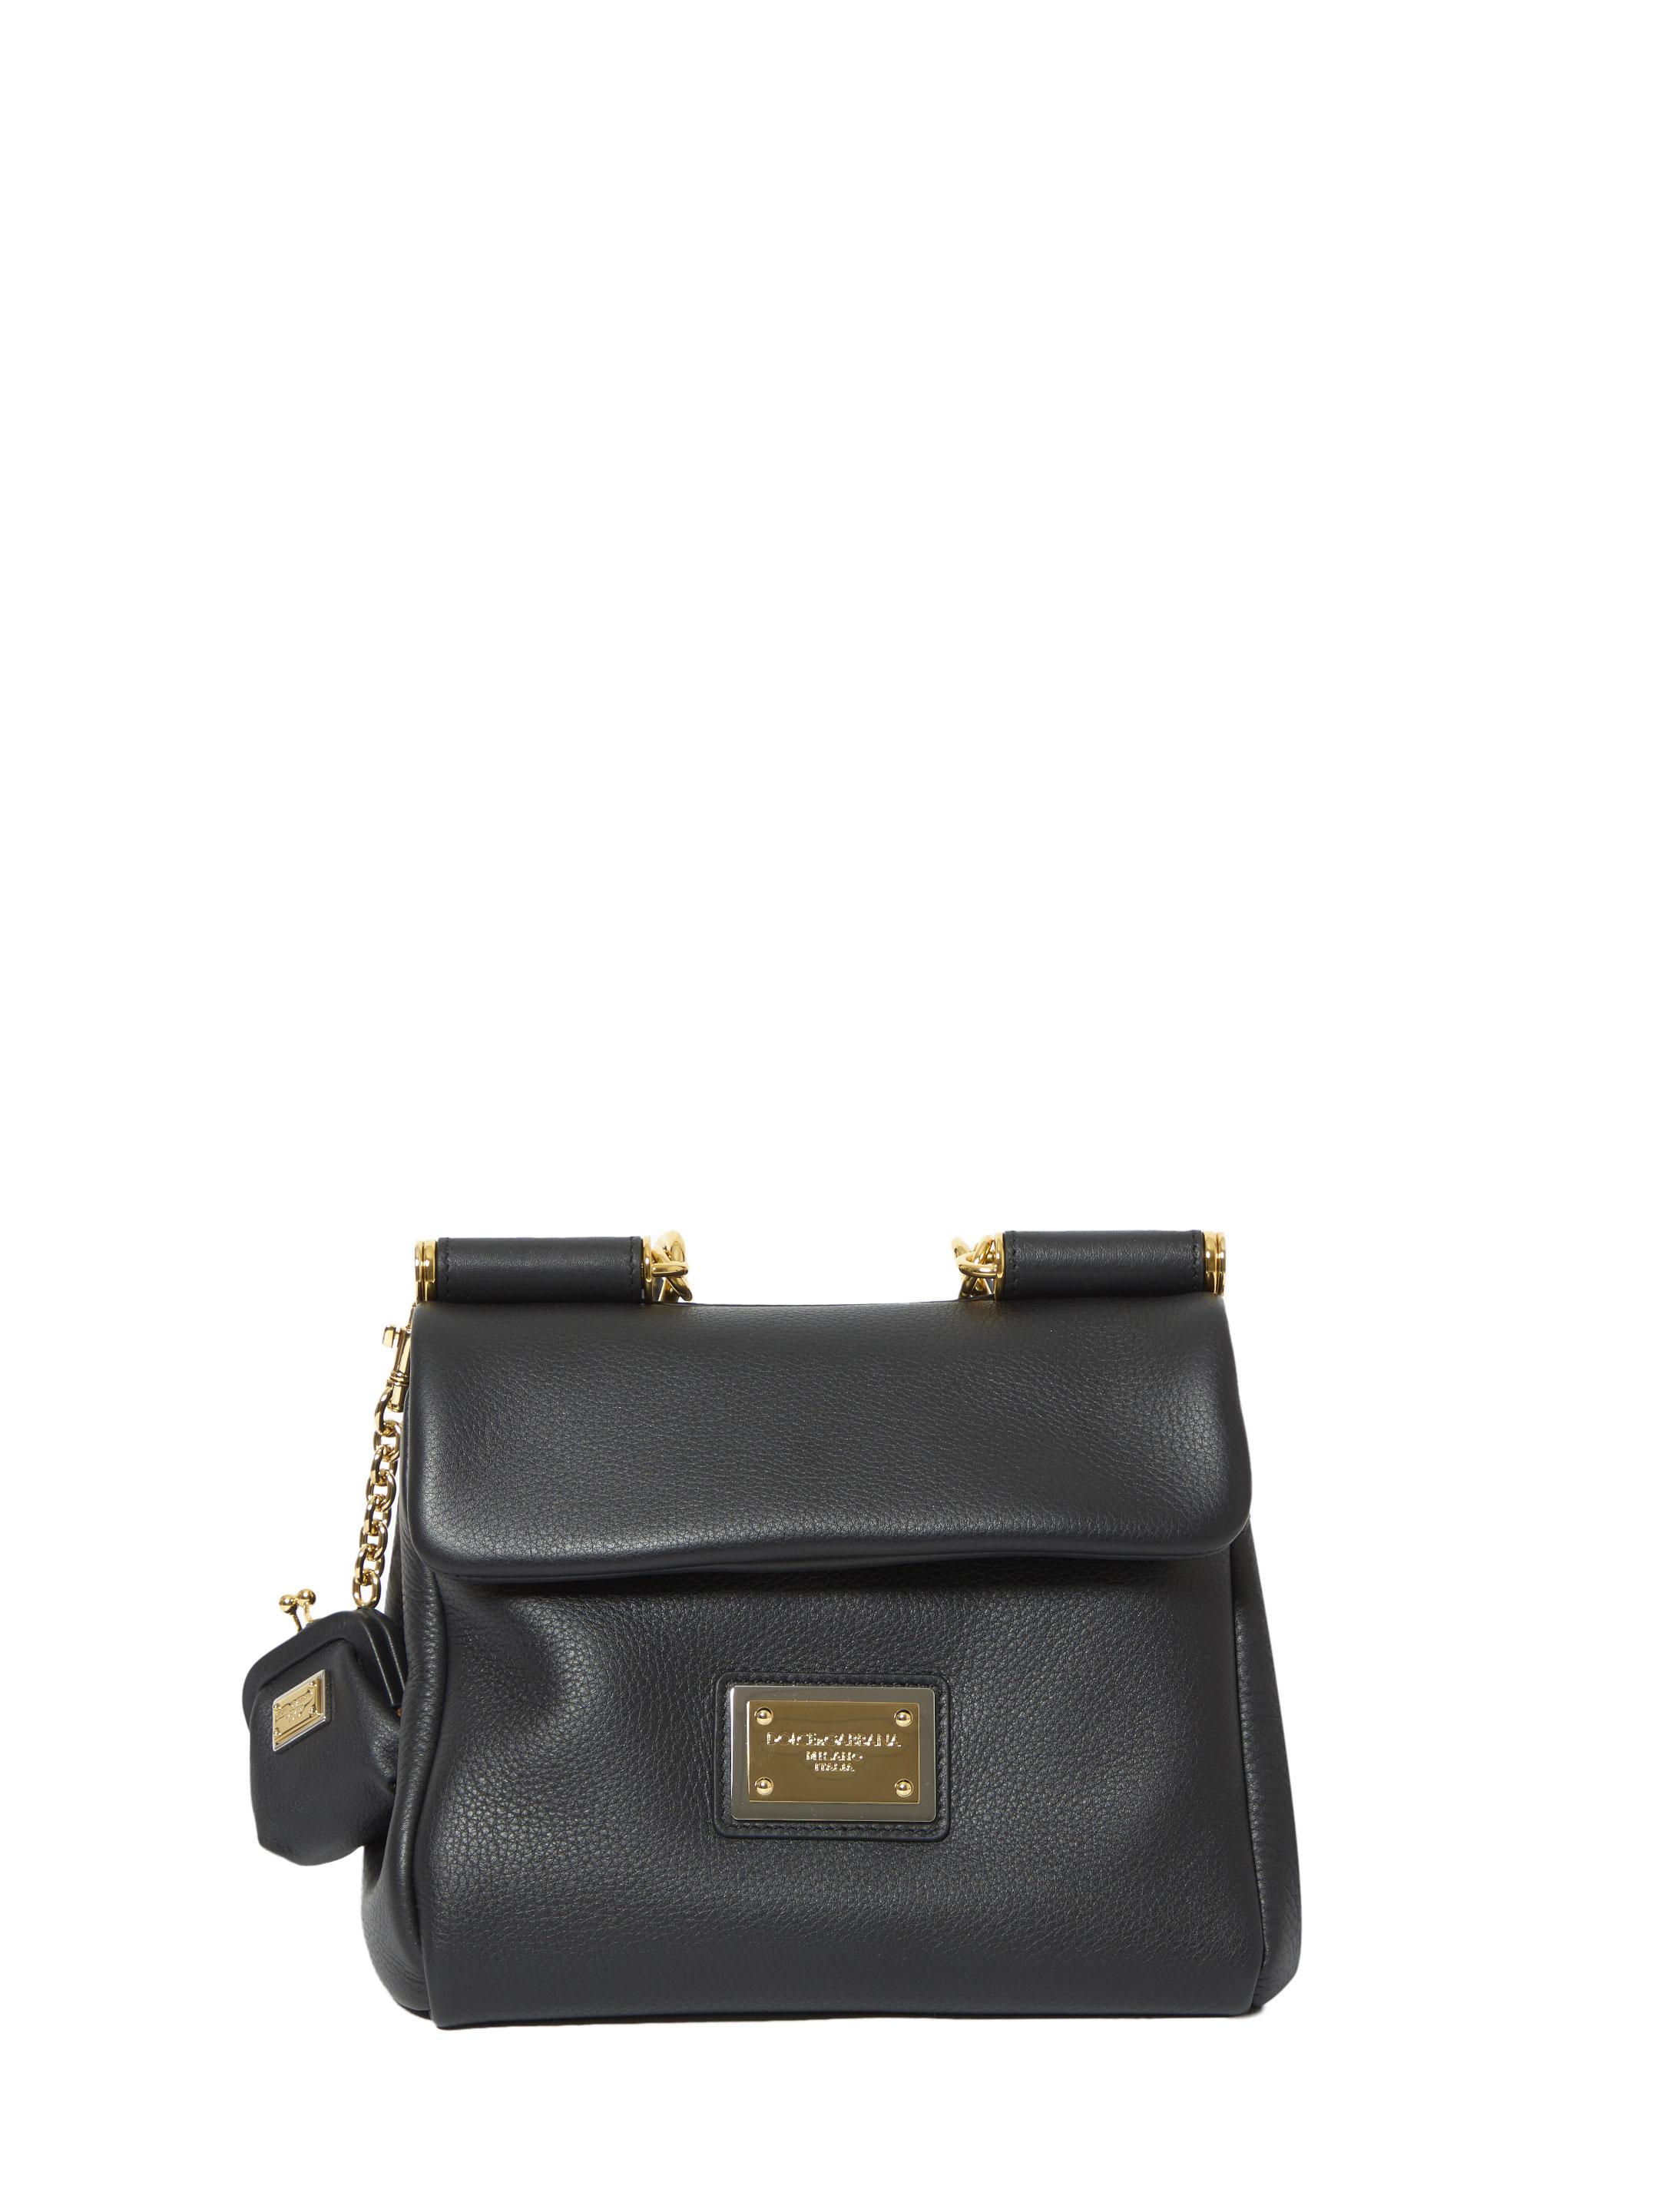 Dolce & Gabbana Small Sicily Top-handle Bag in Black